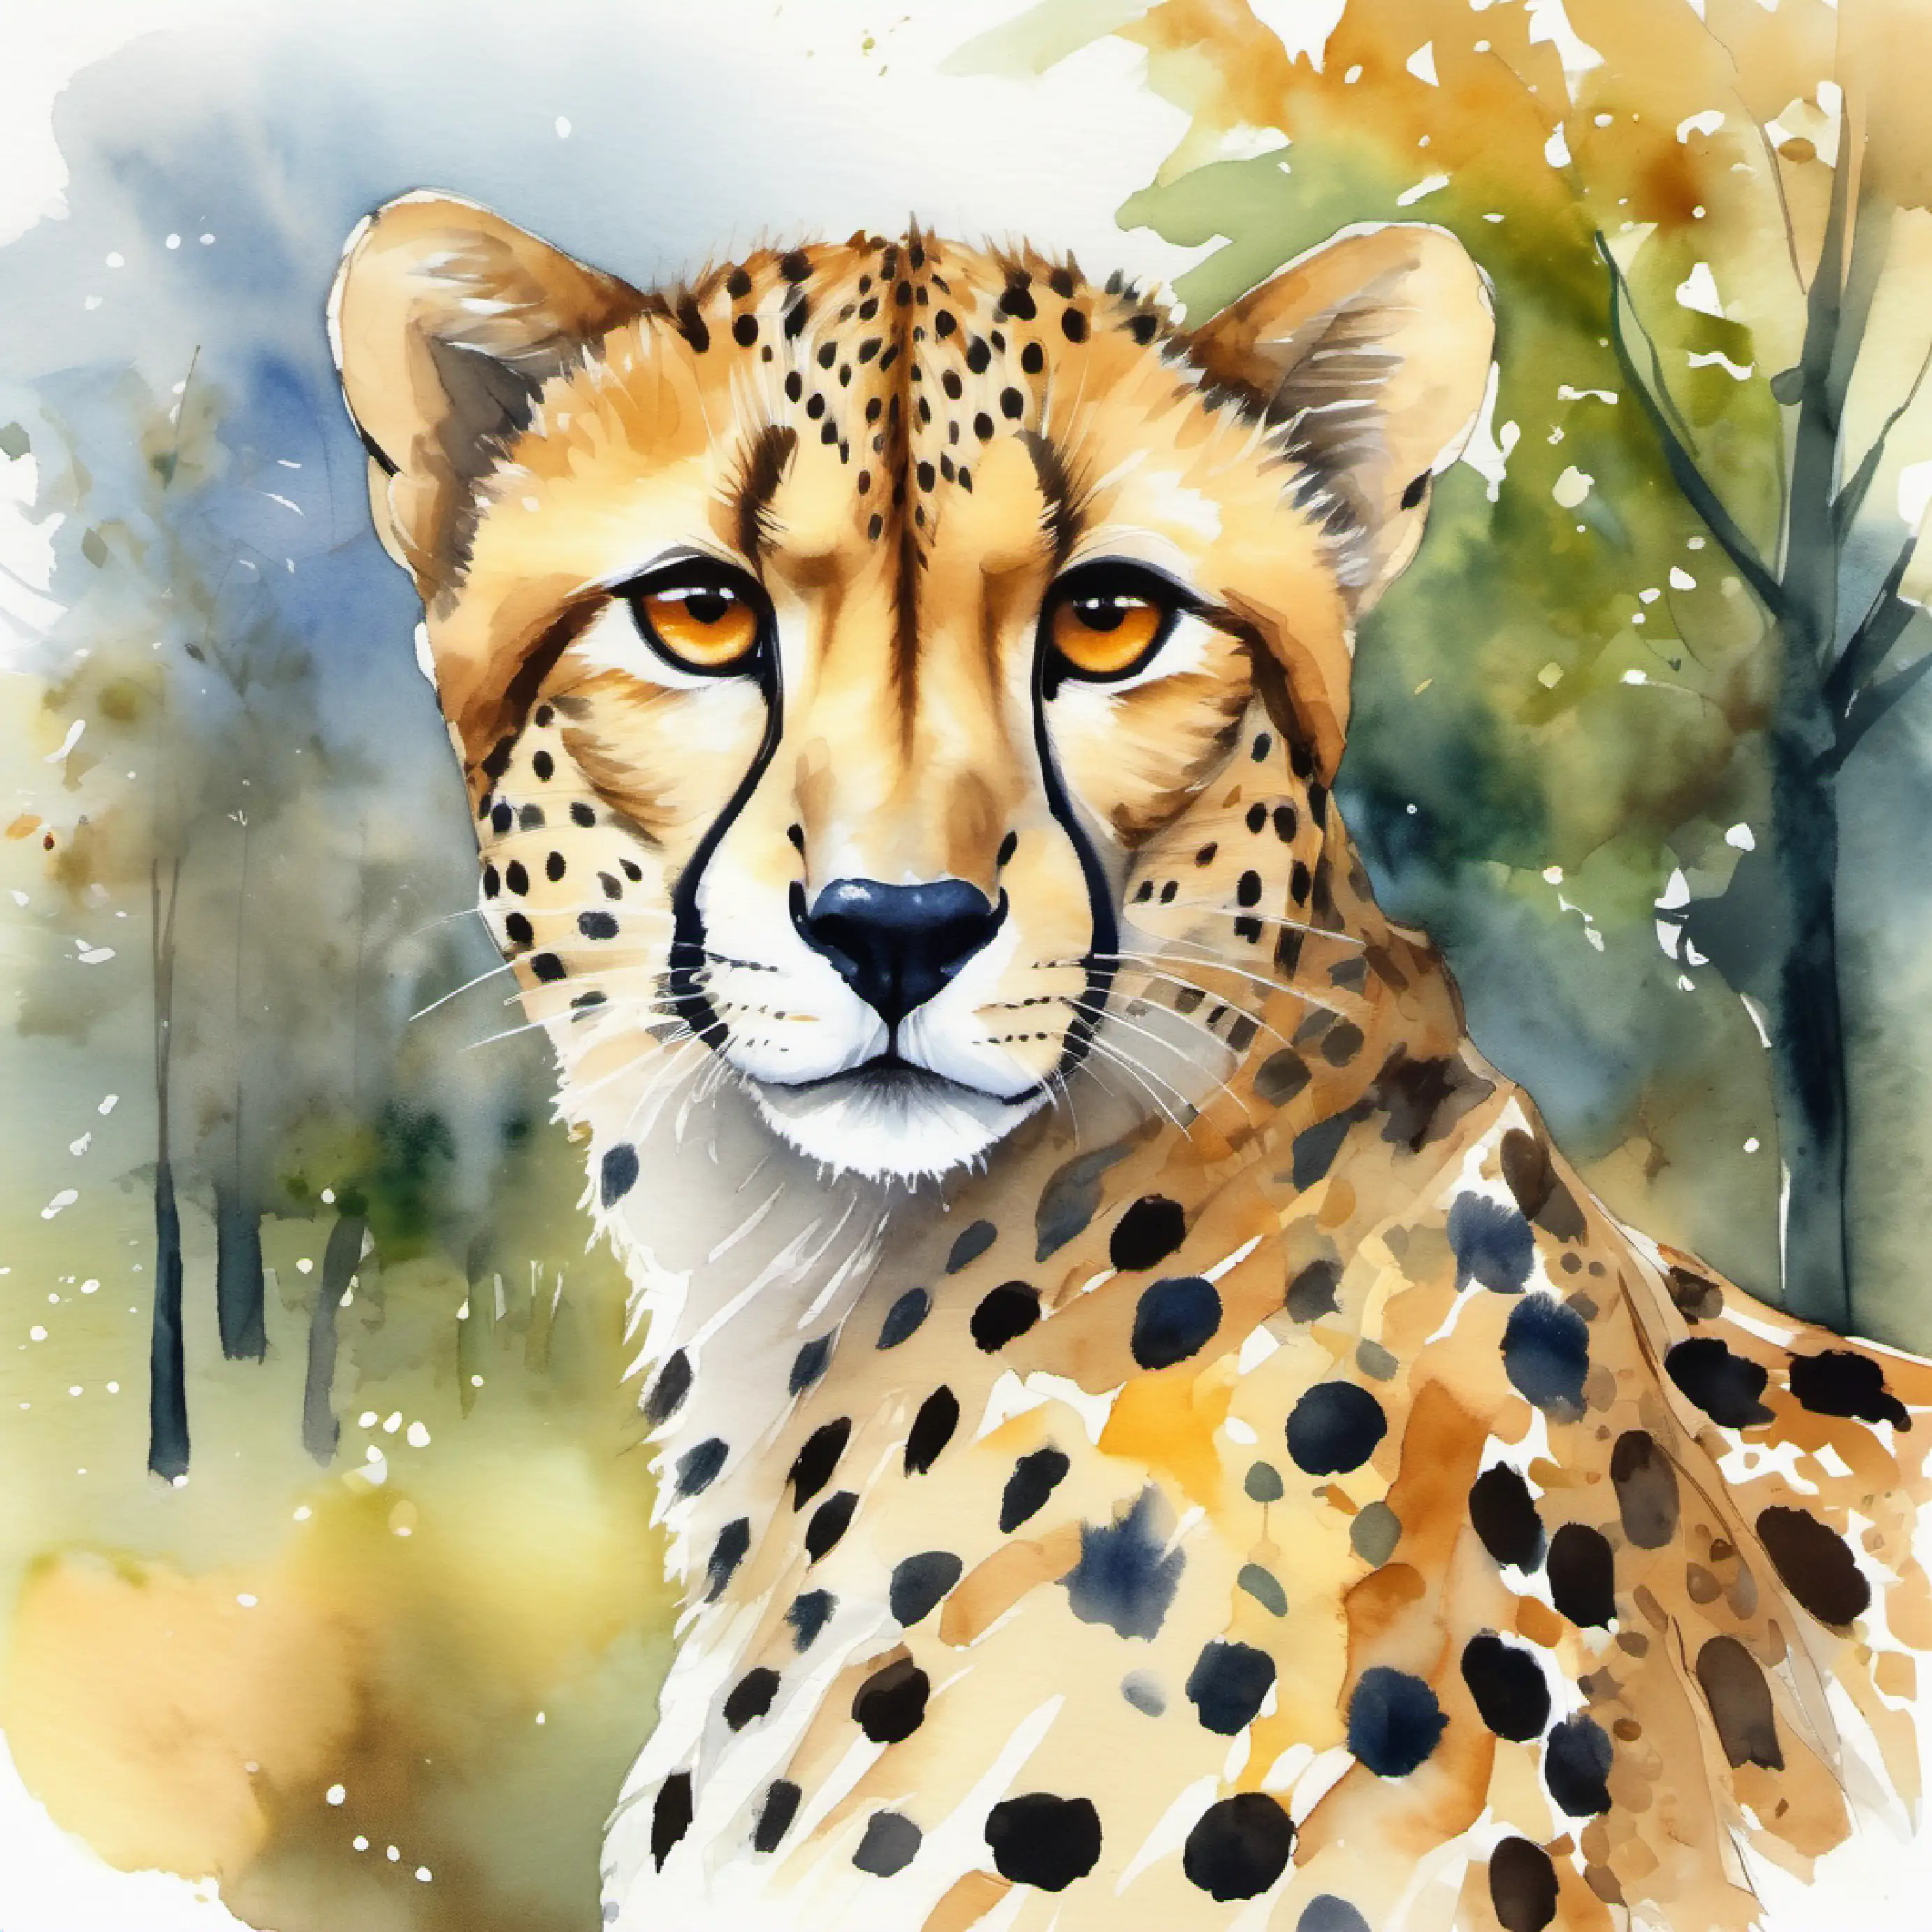 Spotted cheetah, agile, with alert golden eyes and Kind girl, cheerful, with sparkling brown eyes and brown skin in the park enjoying nature.